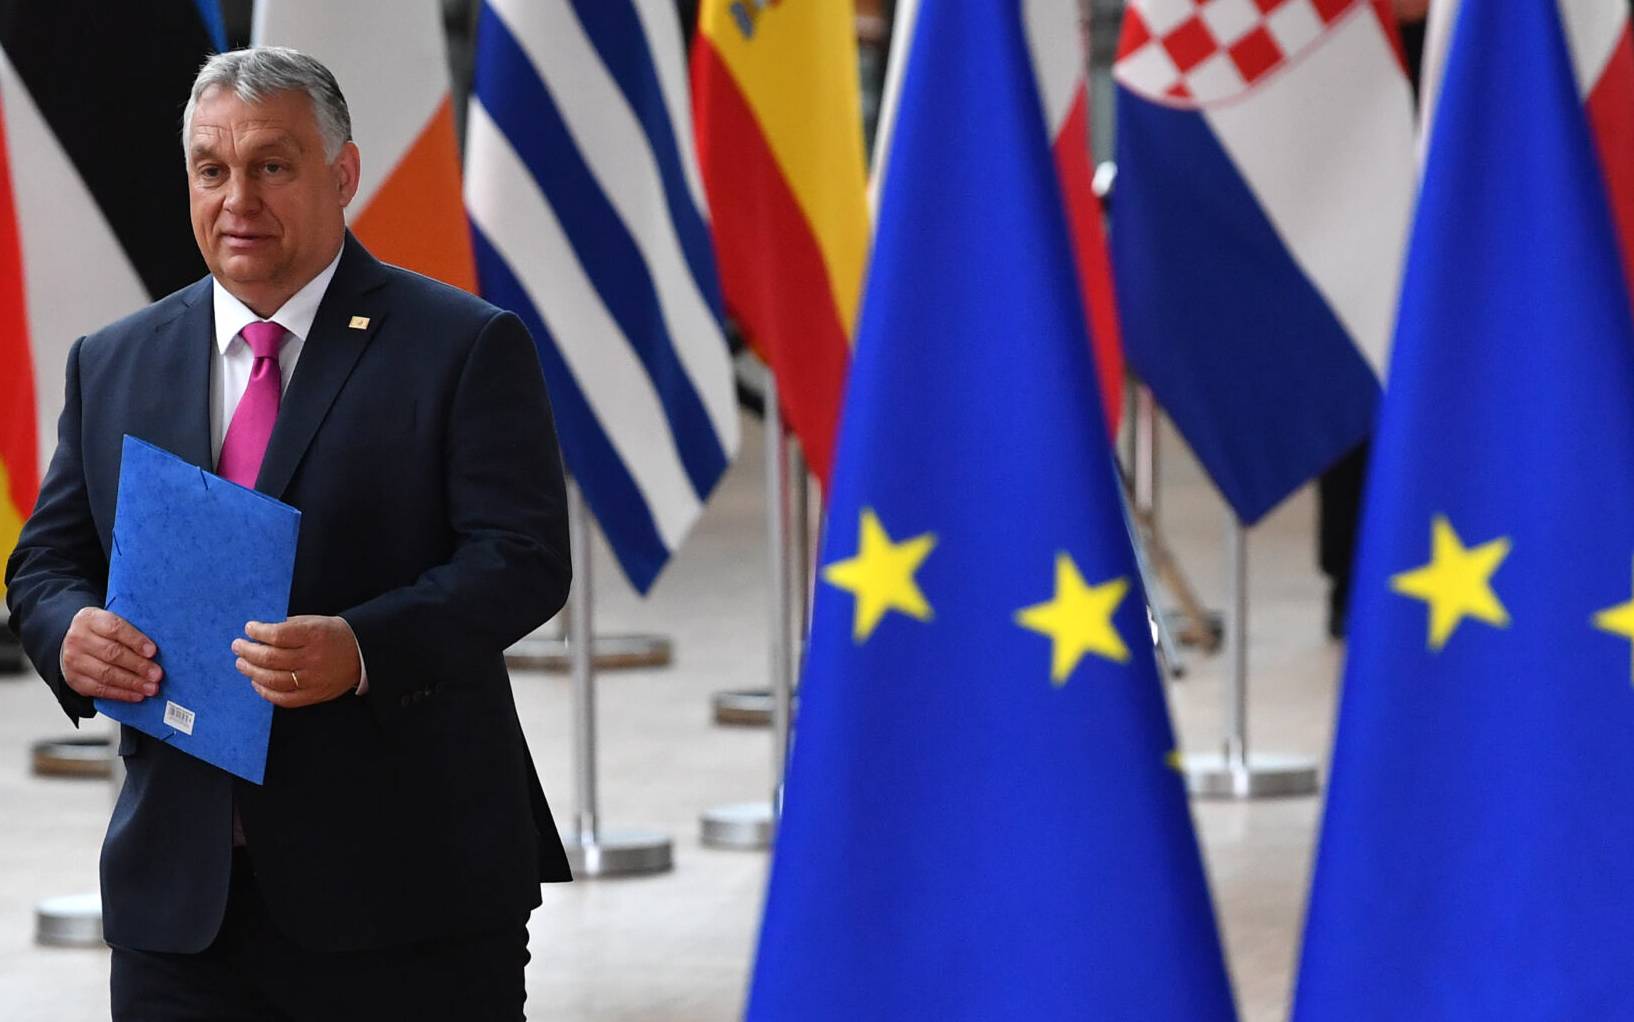 Hungary's Prime Minister Viktor Orban arrives for the first day of a special meeting of the European Council at The European Council Building in Brussels on May 30, 2022. (Photo by JOHN THYS / AFP)